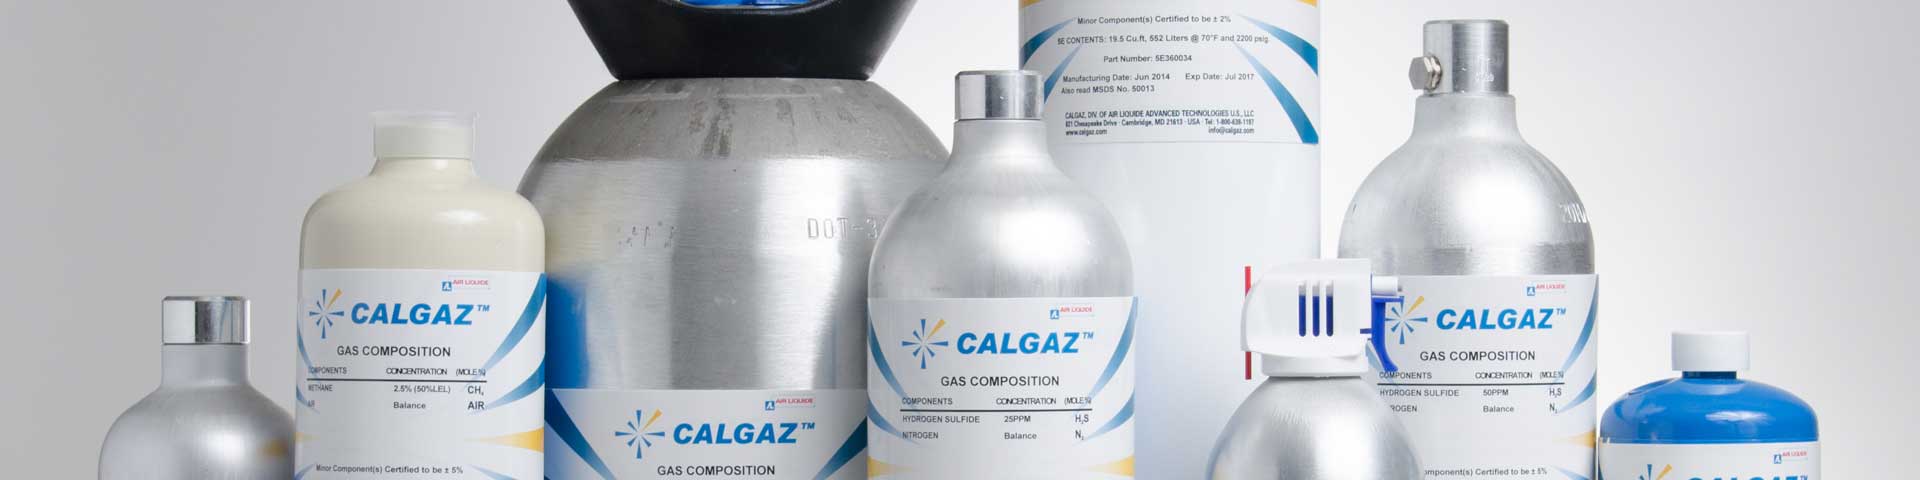 Calibration Gas and Cylinders